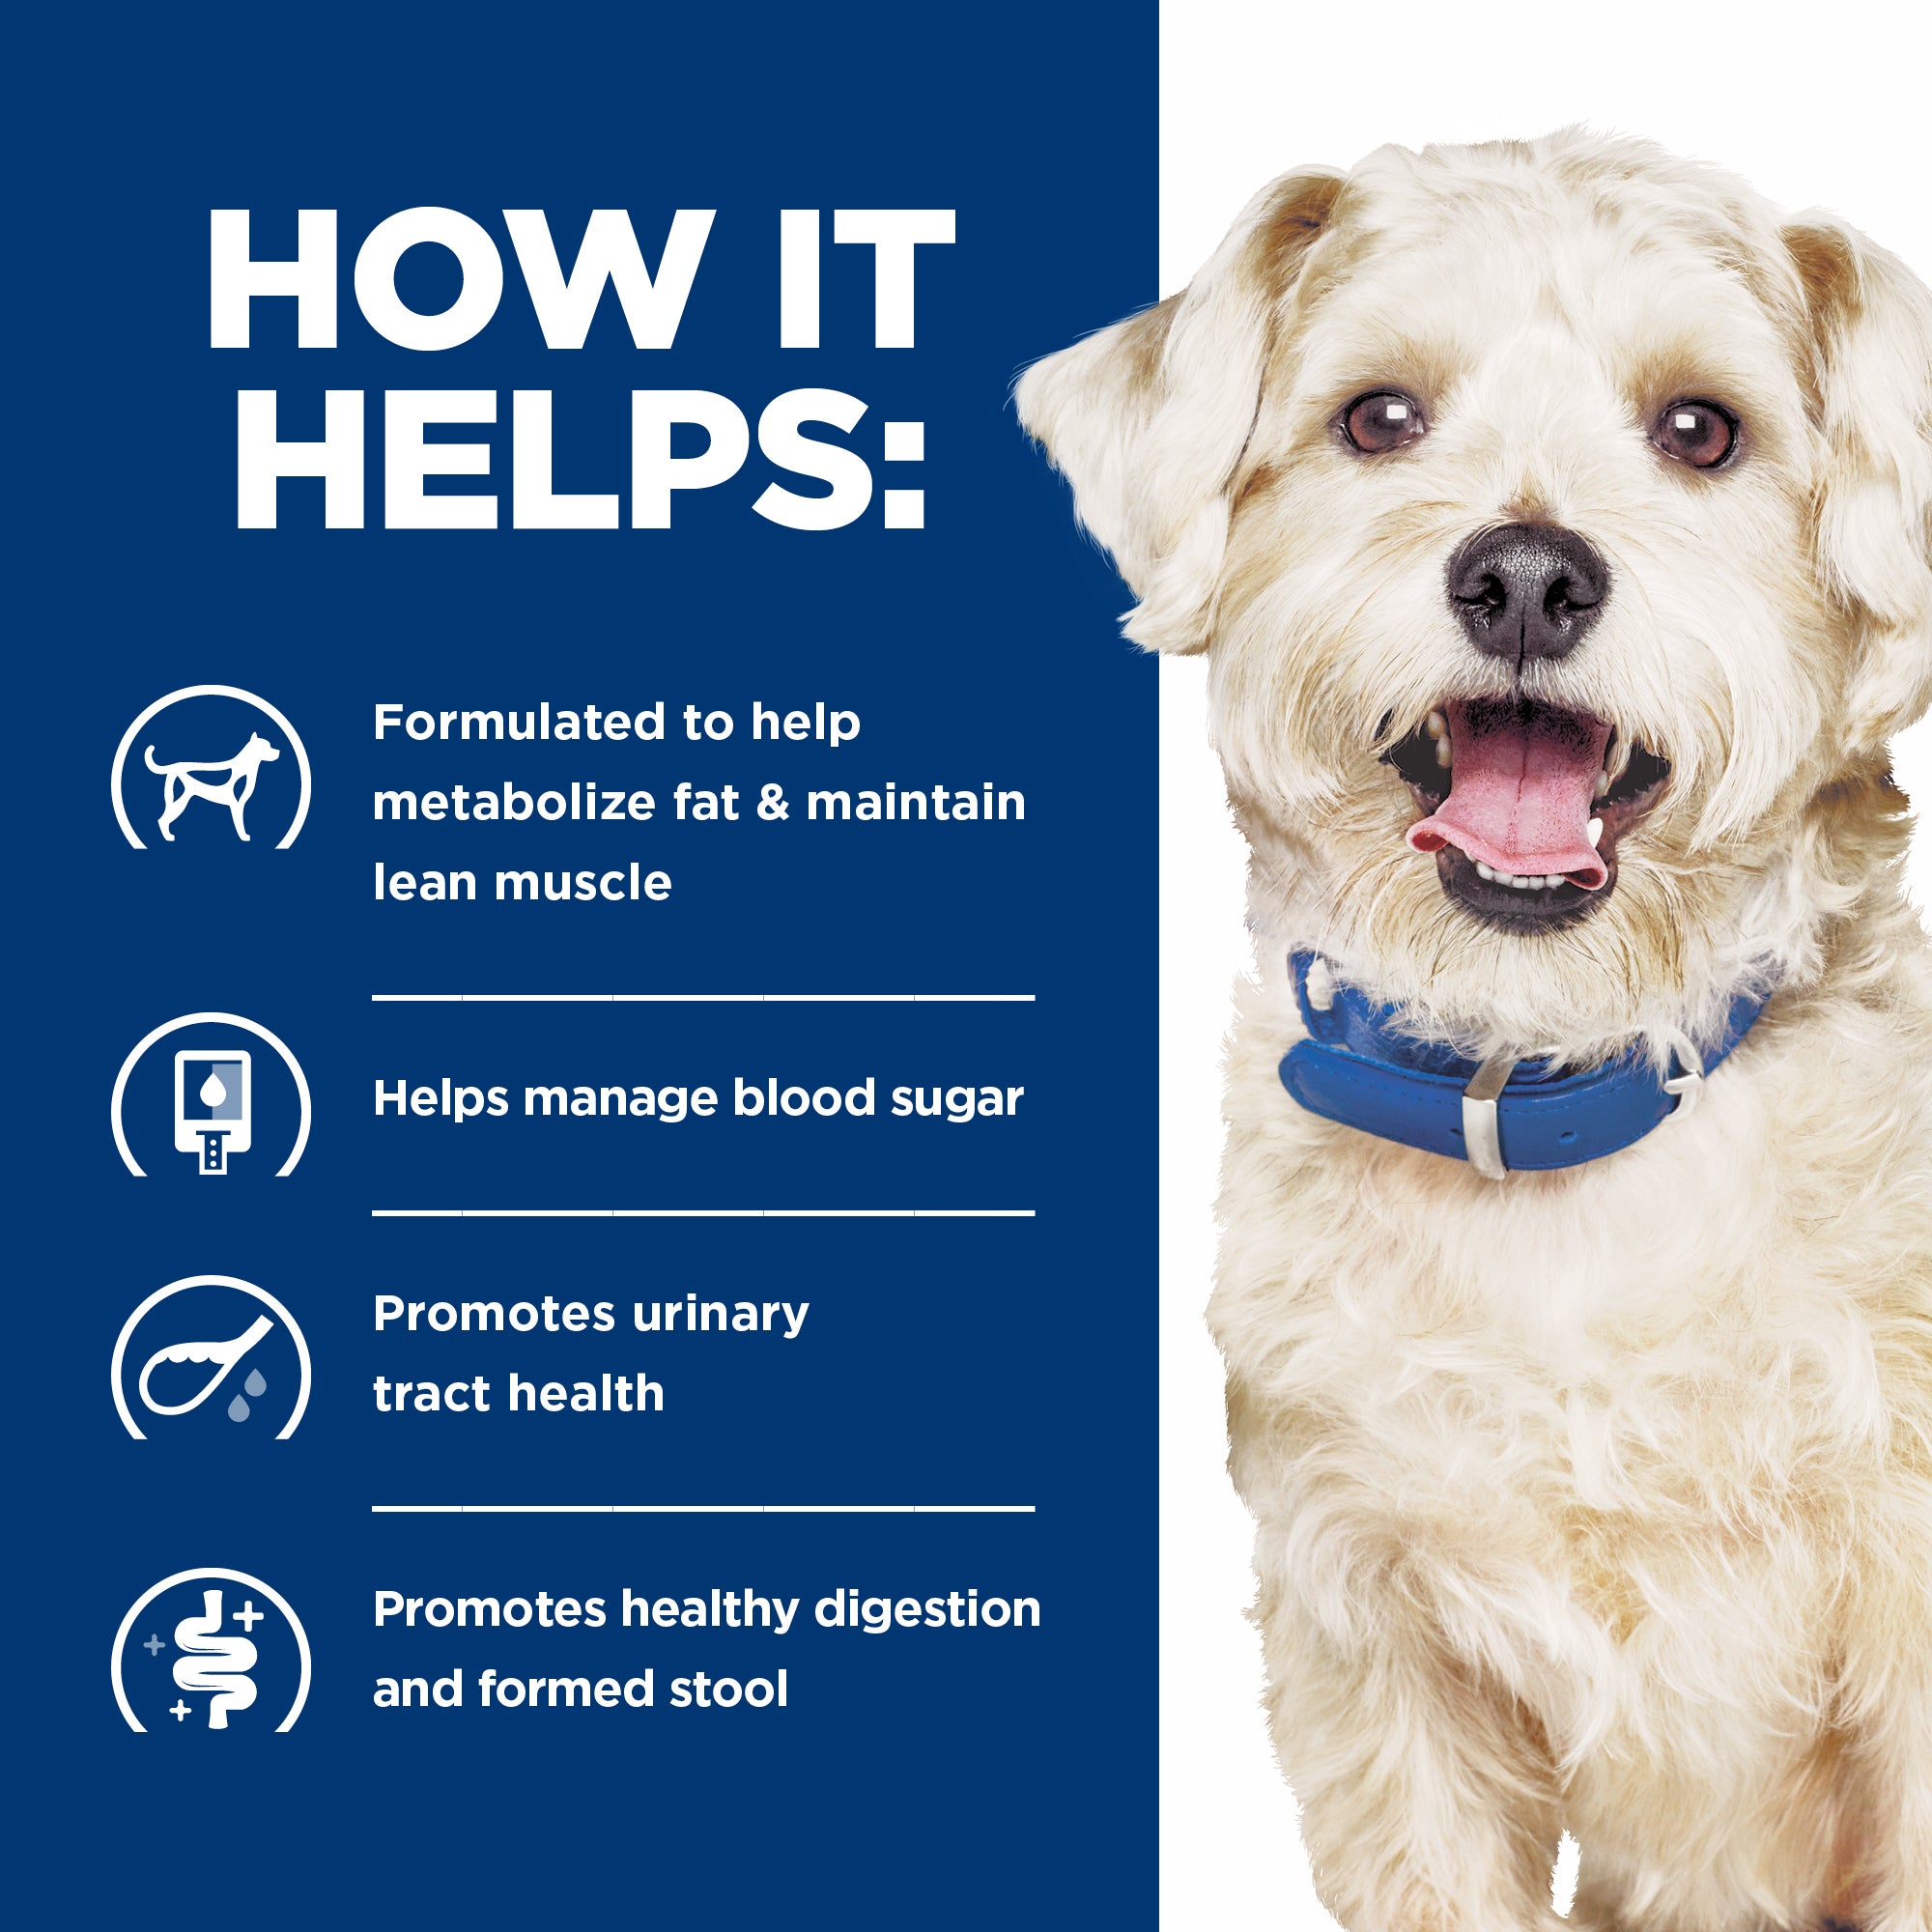 Hill's® Prescription Diet® w/d® Canine Multi Benefit Weight GI & Glucose Management Canned